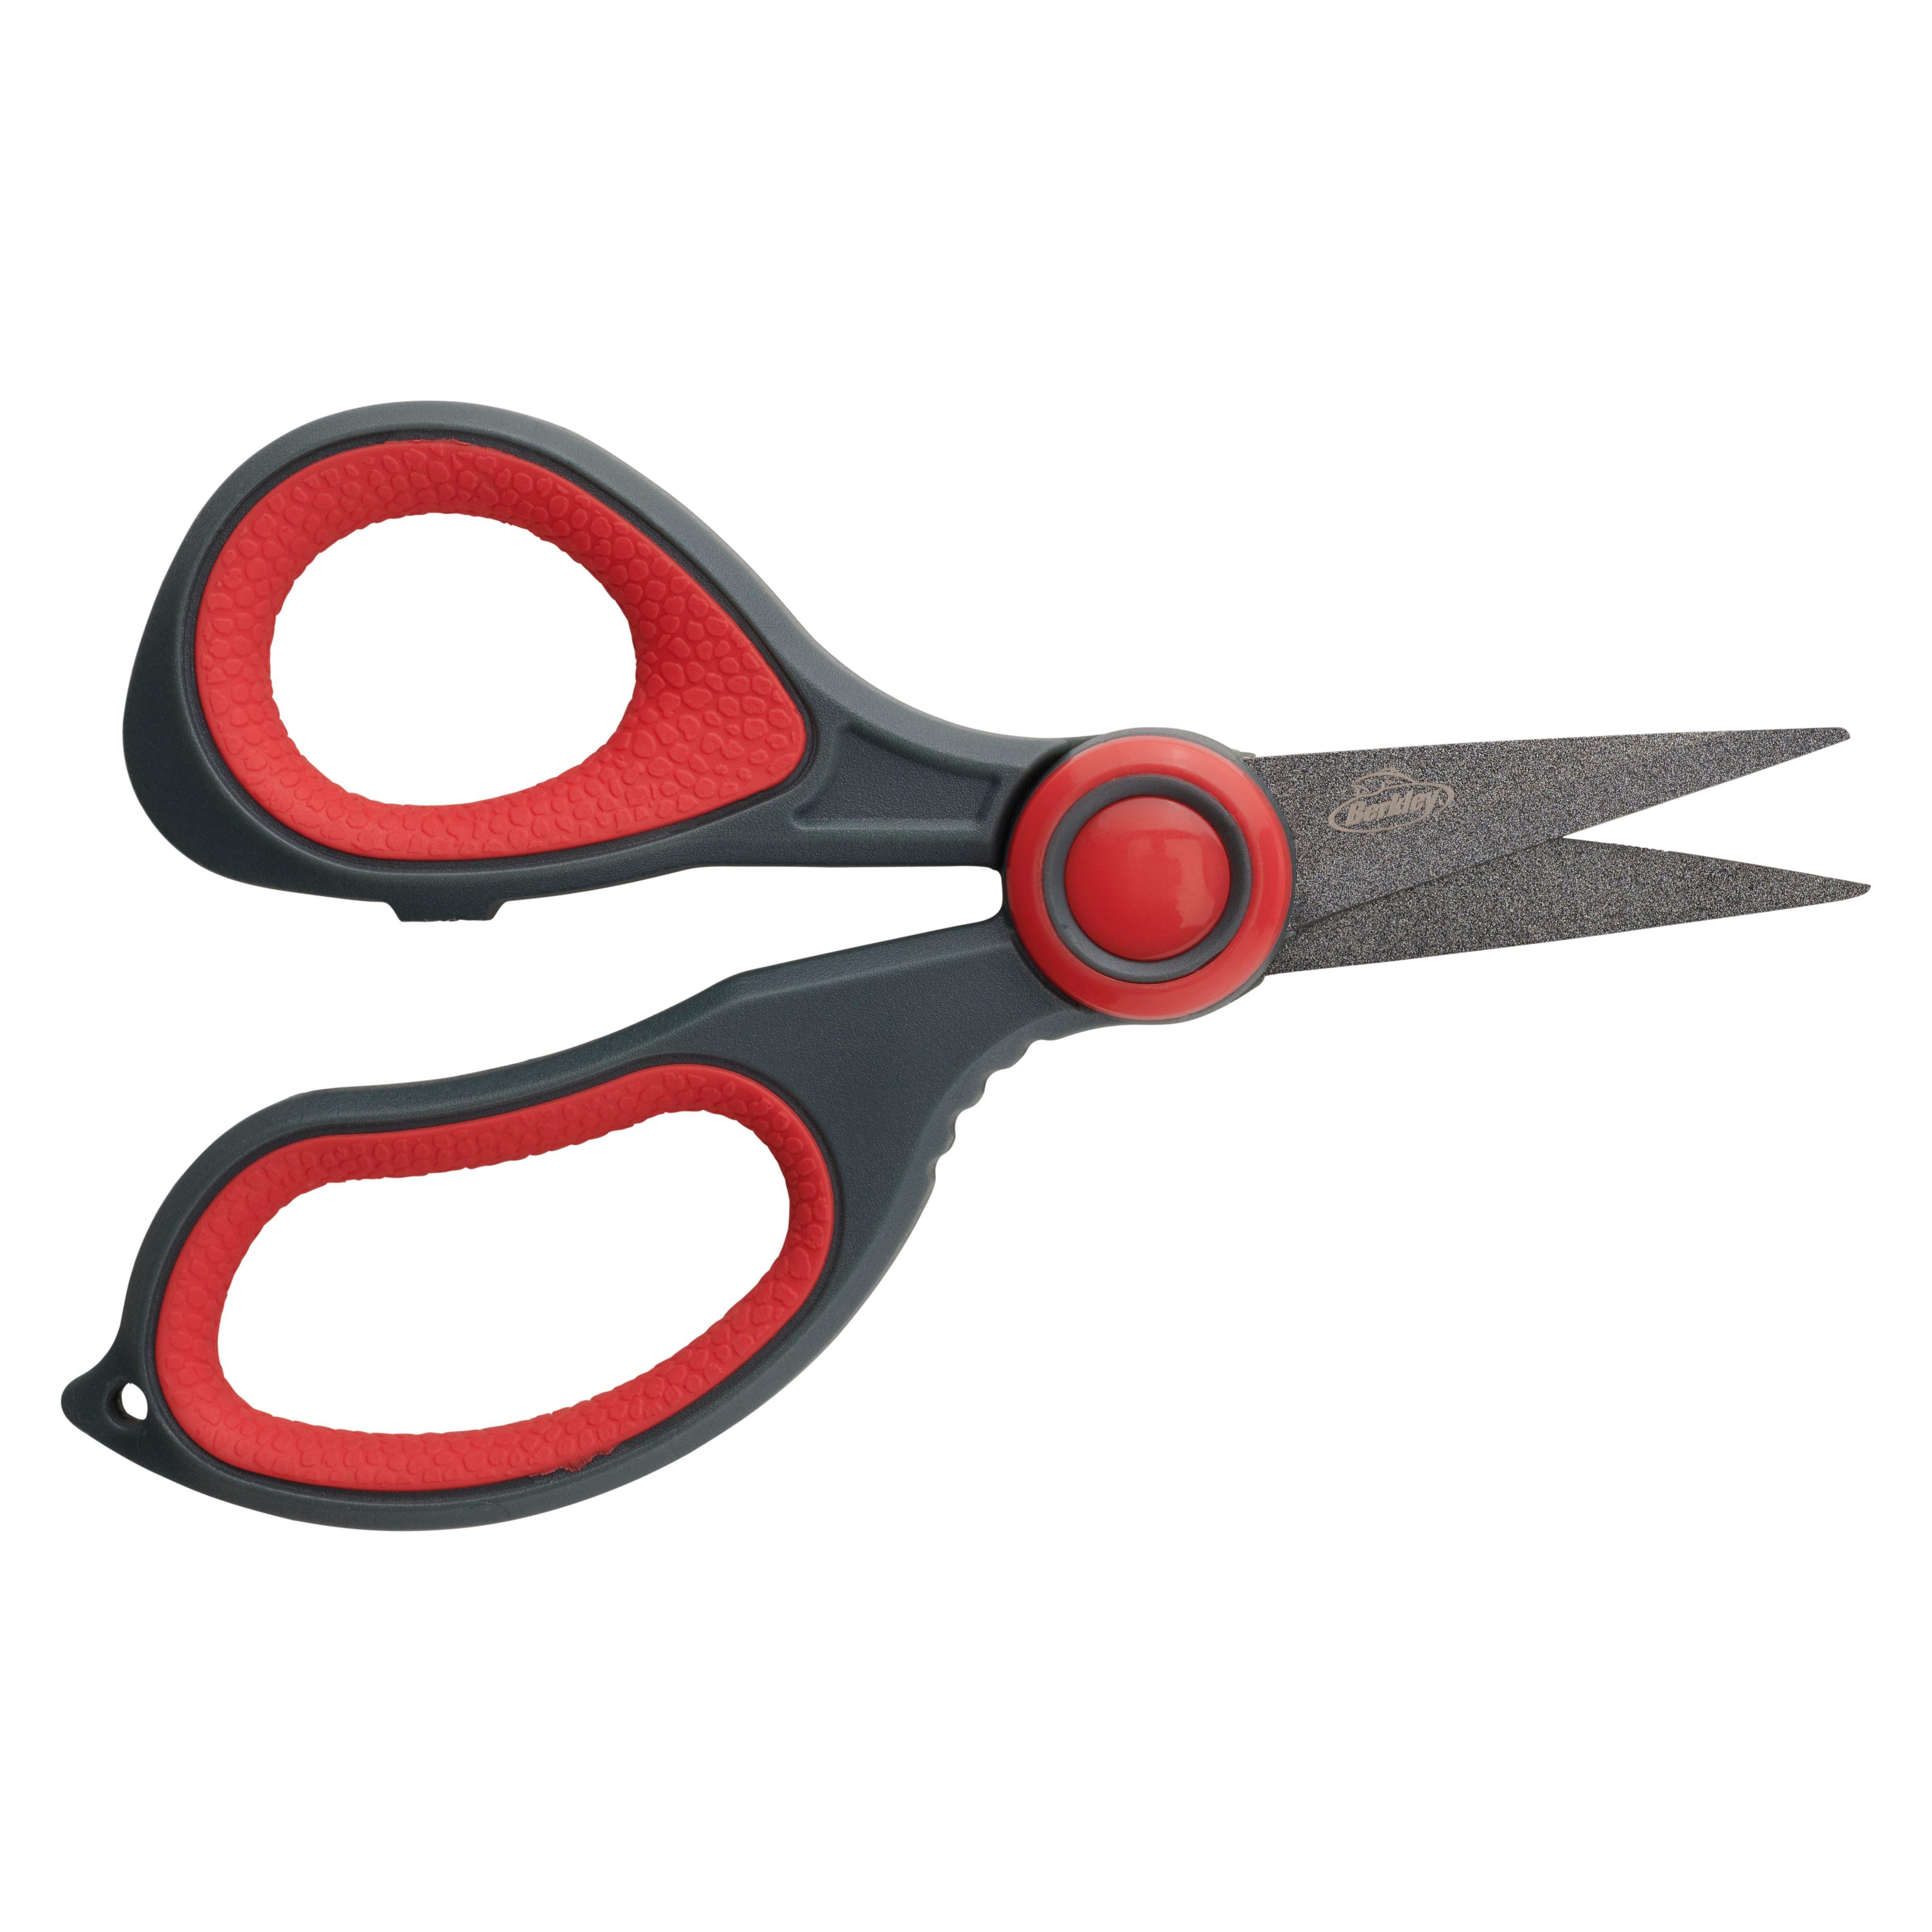 Berkley Bait Shears, Stainless Steel Construction, Cut Bait Into Chunks and  Clean Your Catch, Make Fish Cutting Chores a Breeze, Soft Handles for